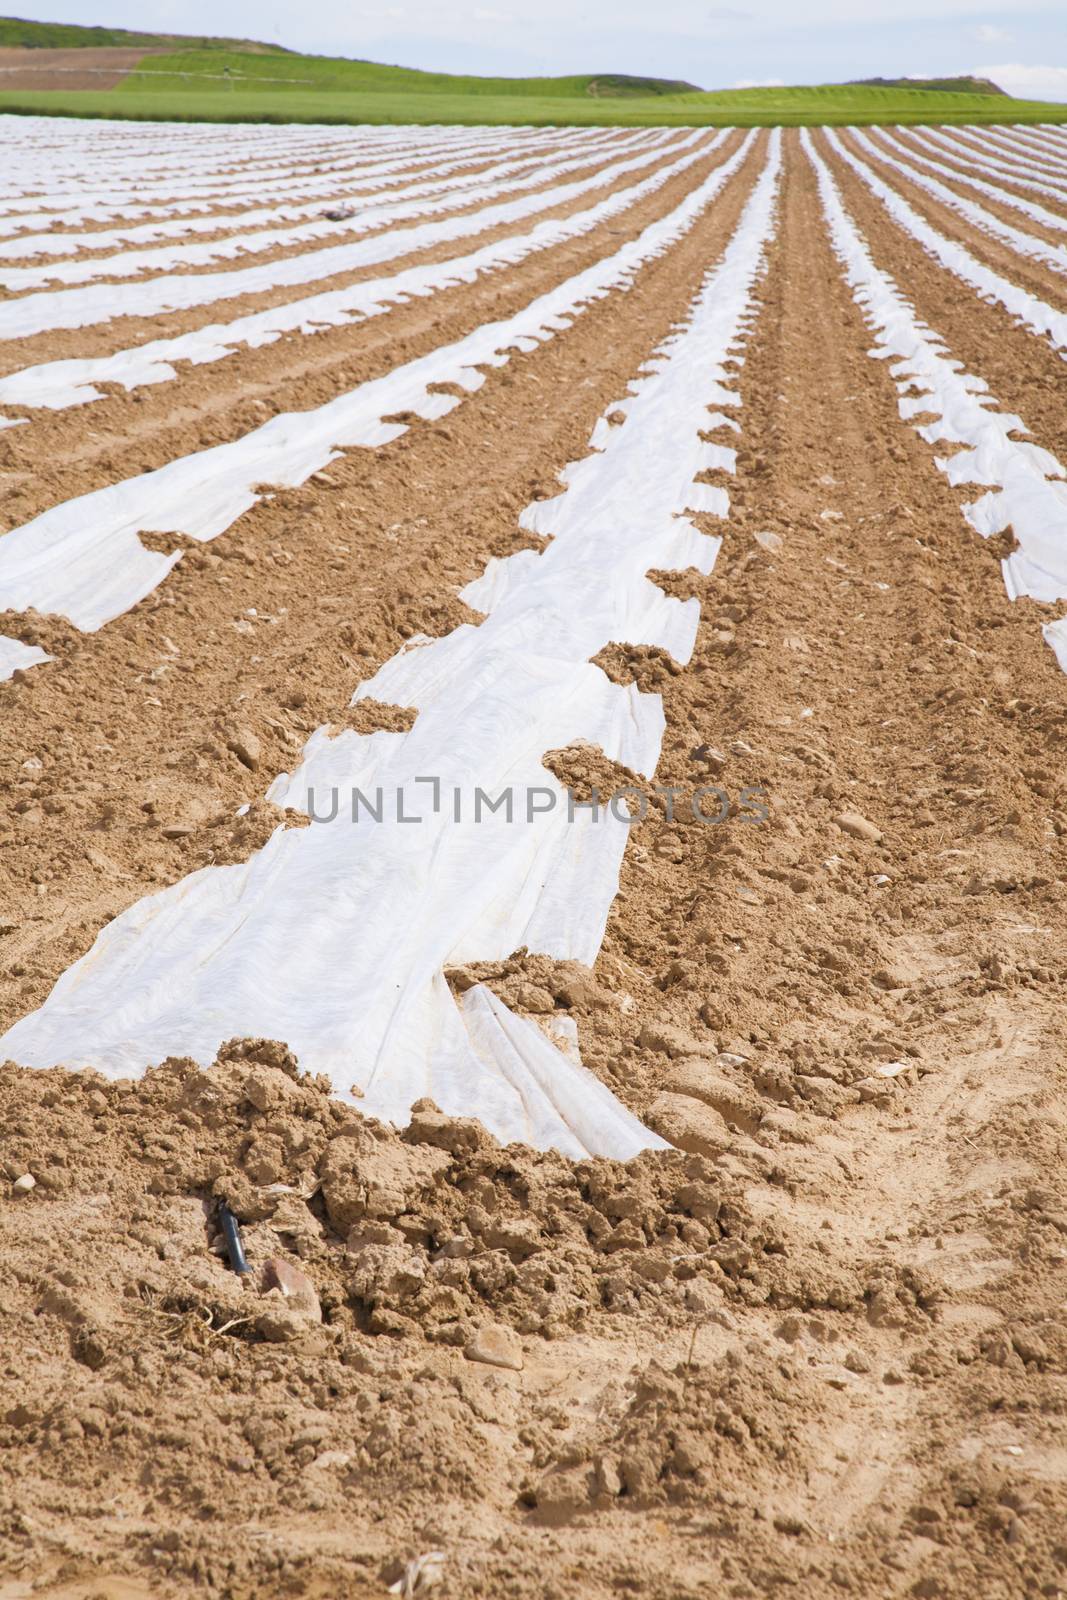 cultivation with plastic lines by quintanilla